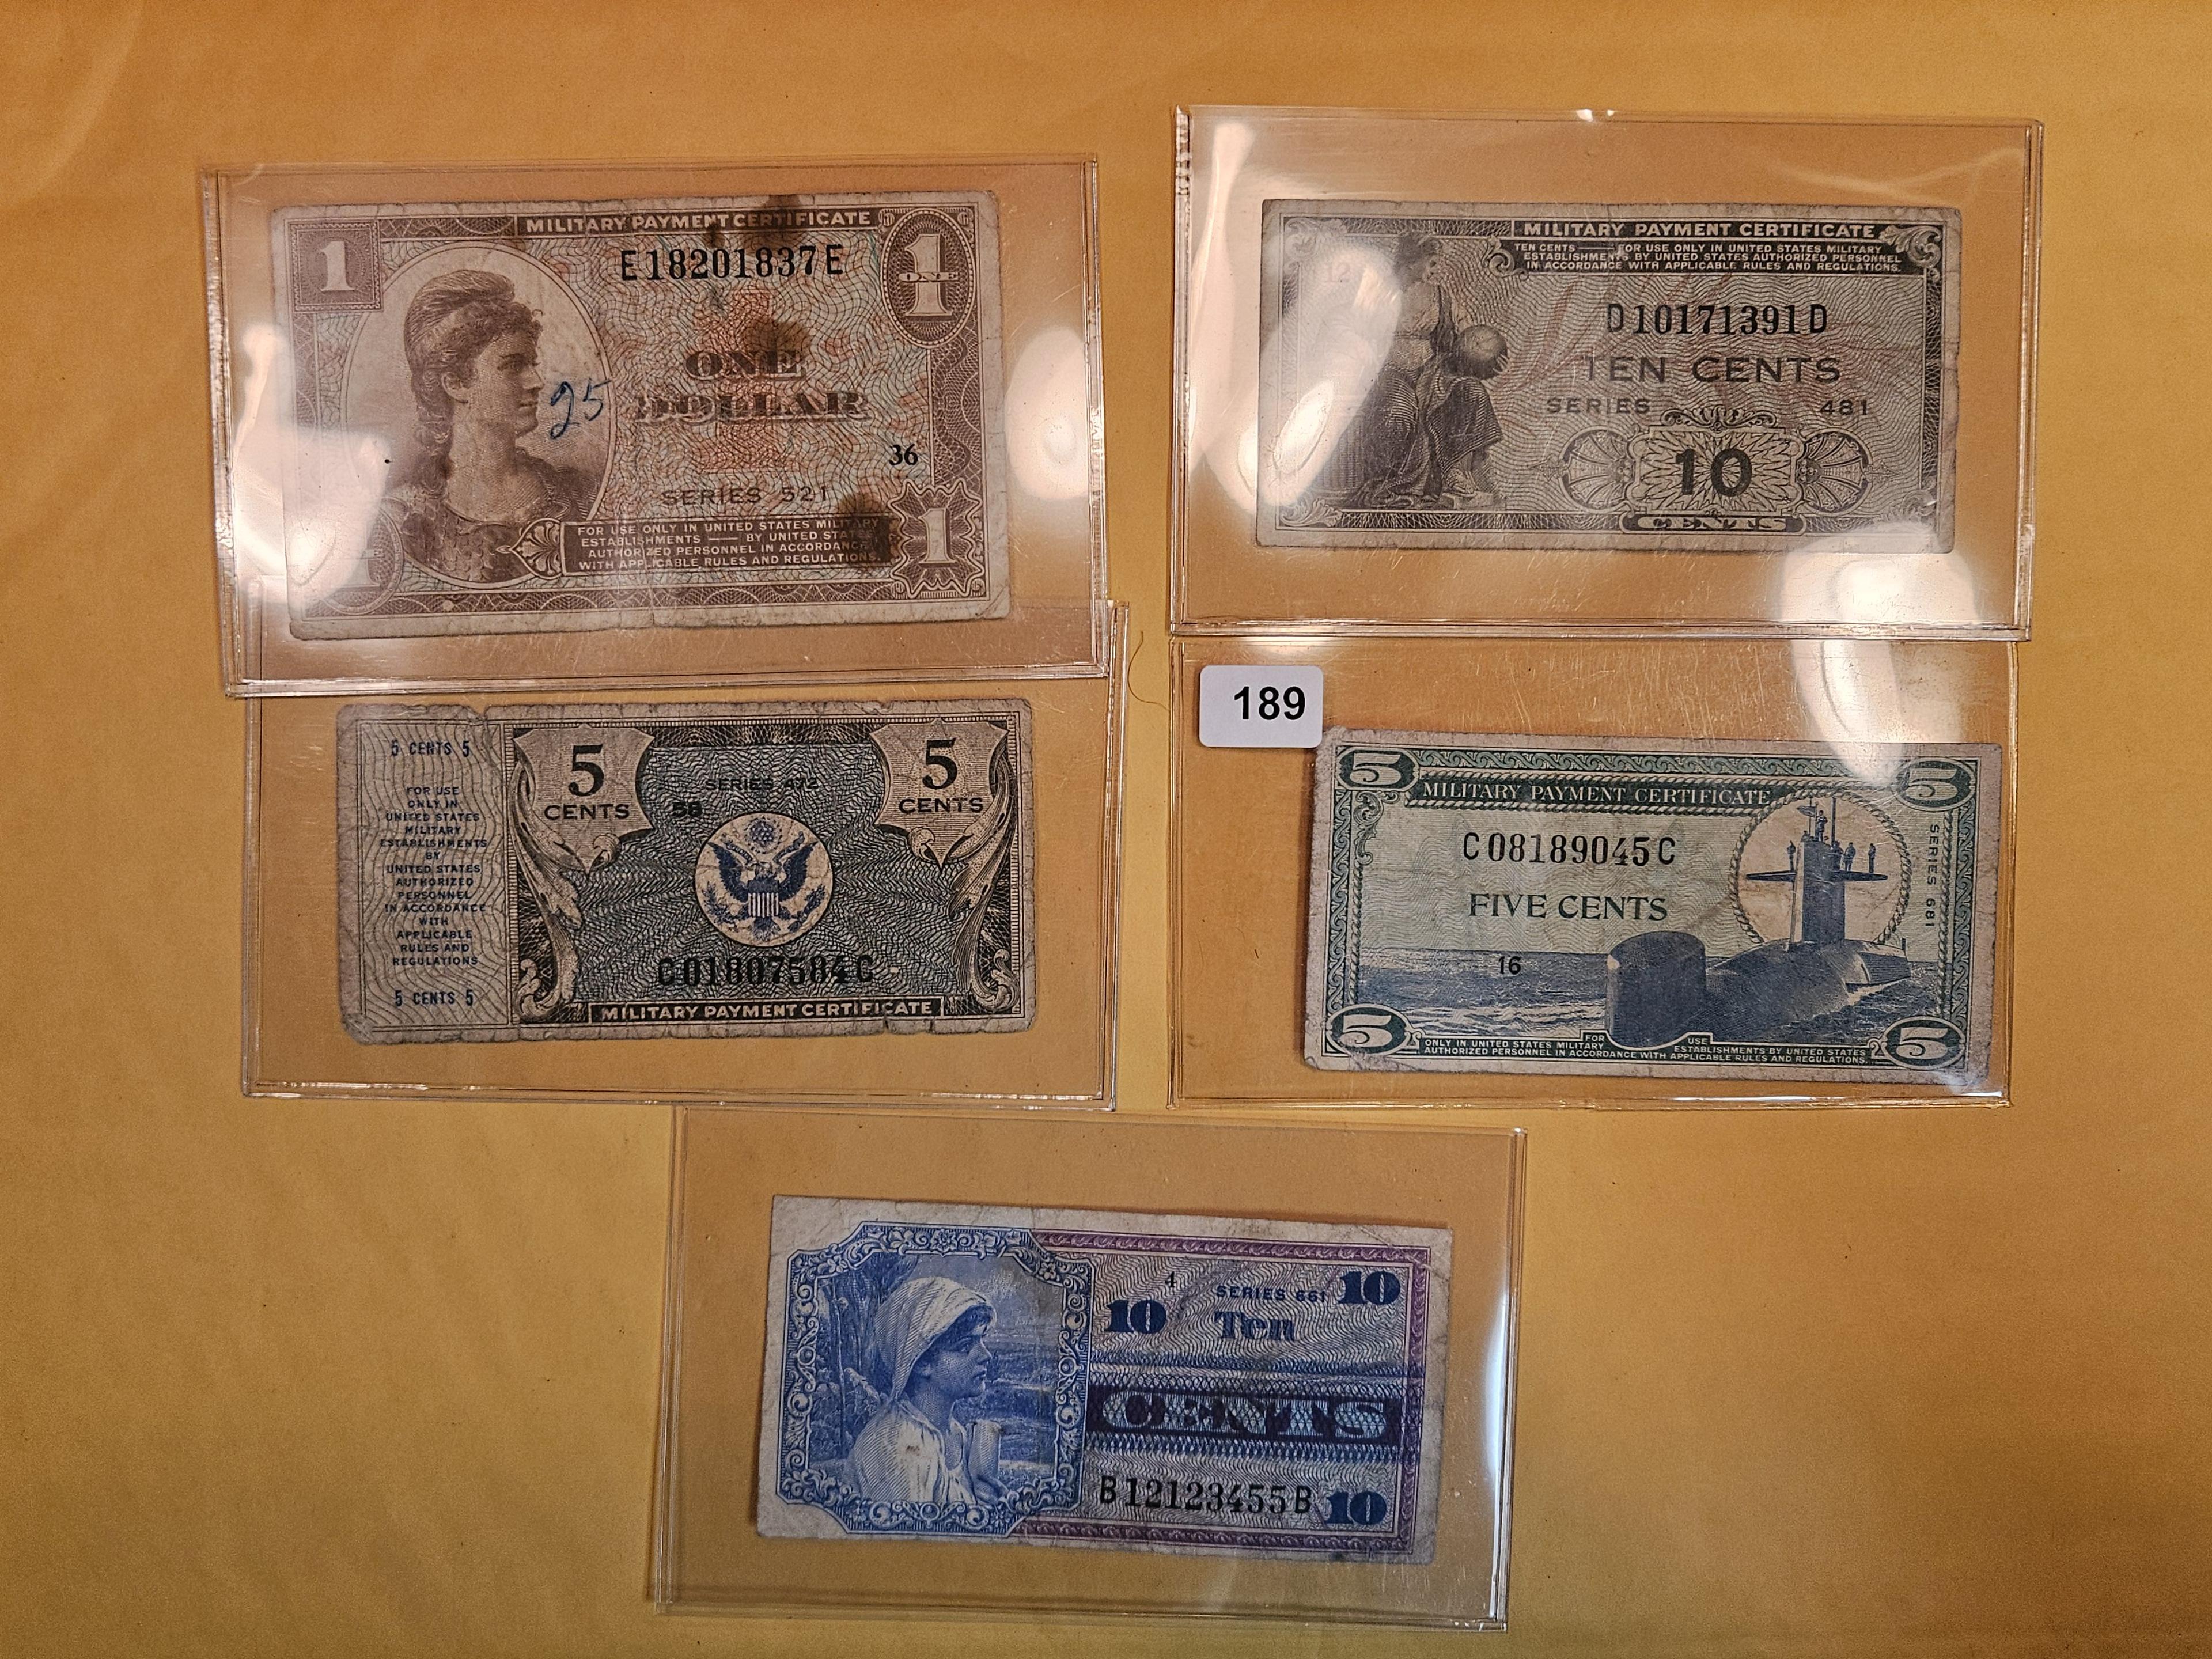 Five more vintage Military Payment Certificates